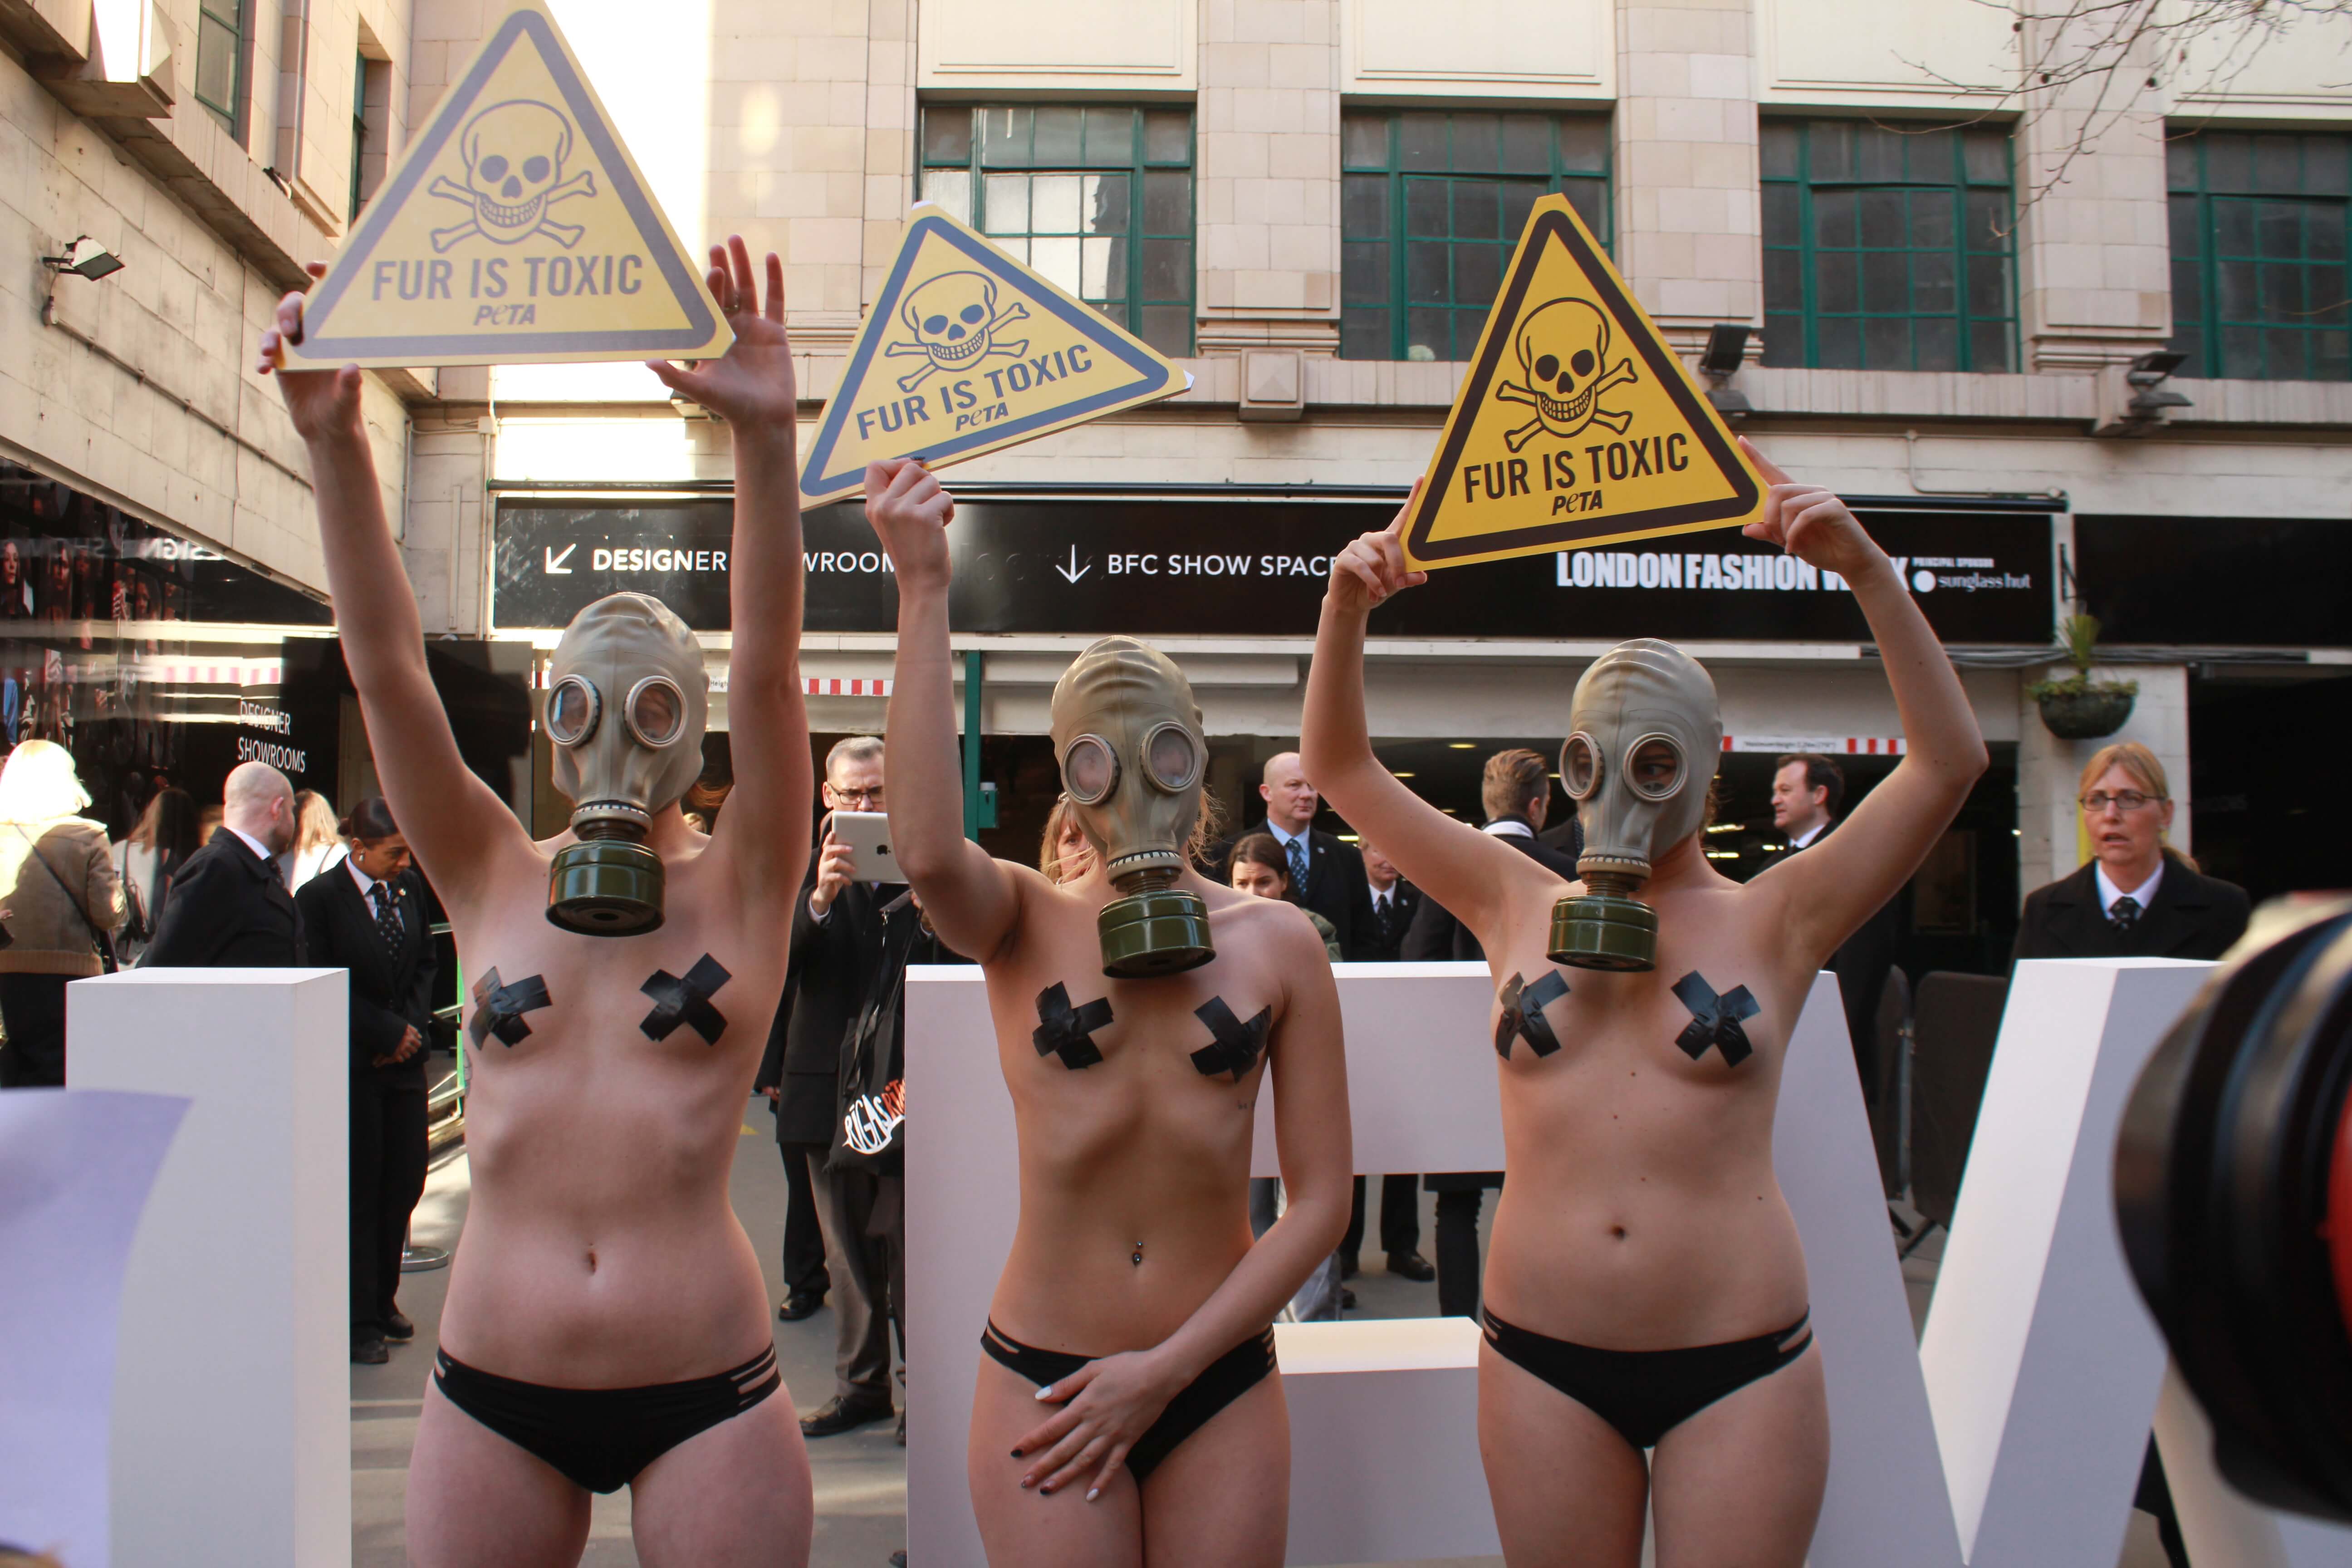 Fur is Toxic: Nearly Nude Models Wearing Gas Masks Crash London Fashion Wee...